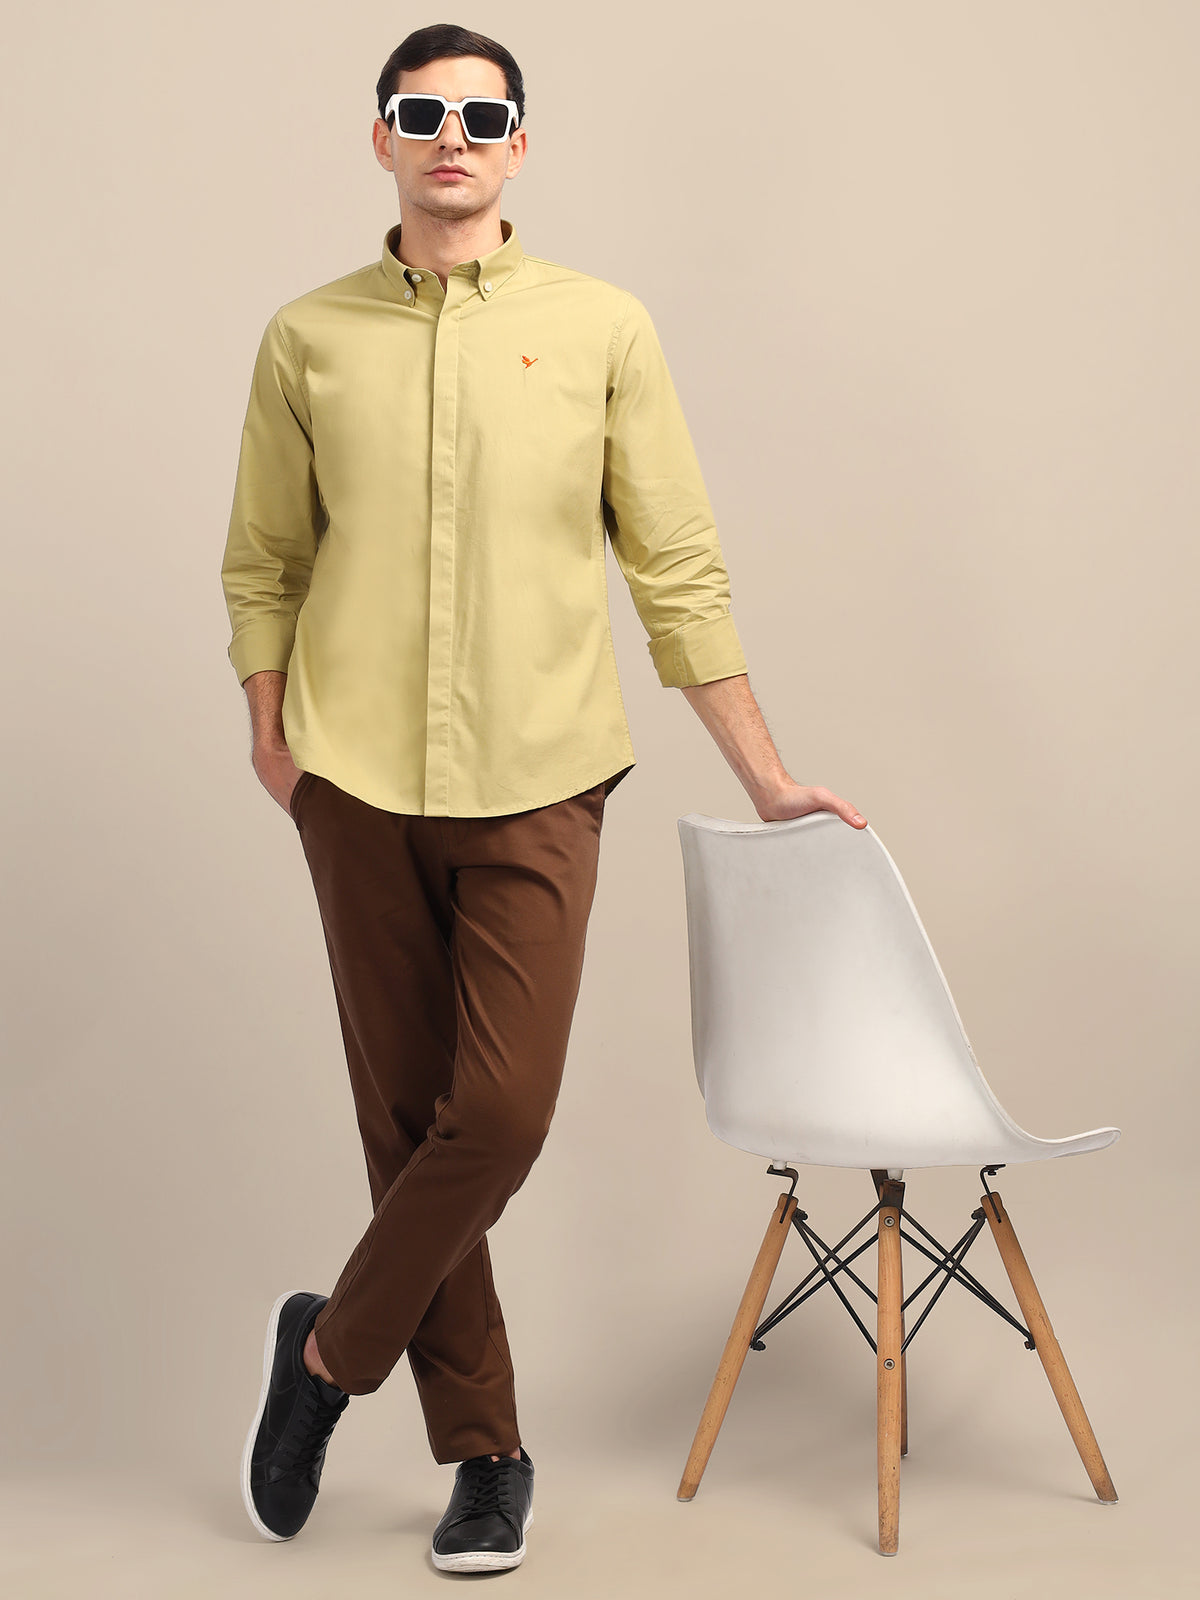 AMSWAN PALE YELLOW ATHLEISURE SHIRTS WITH PREMIUM COTTON LYCRA